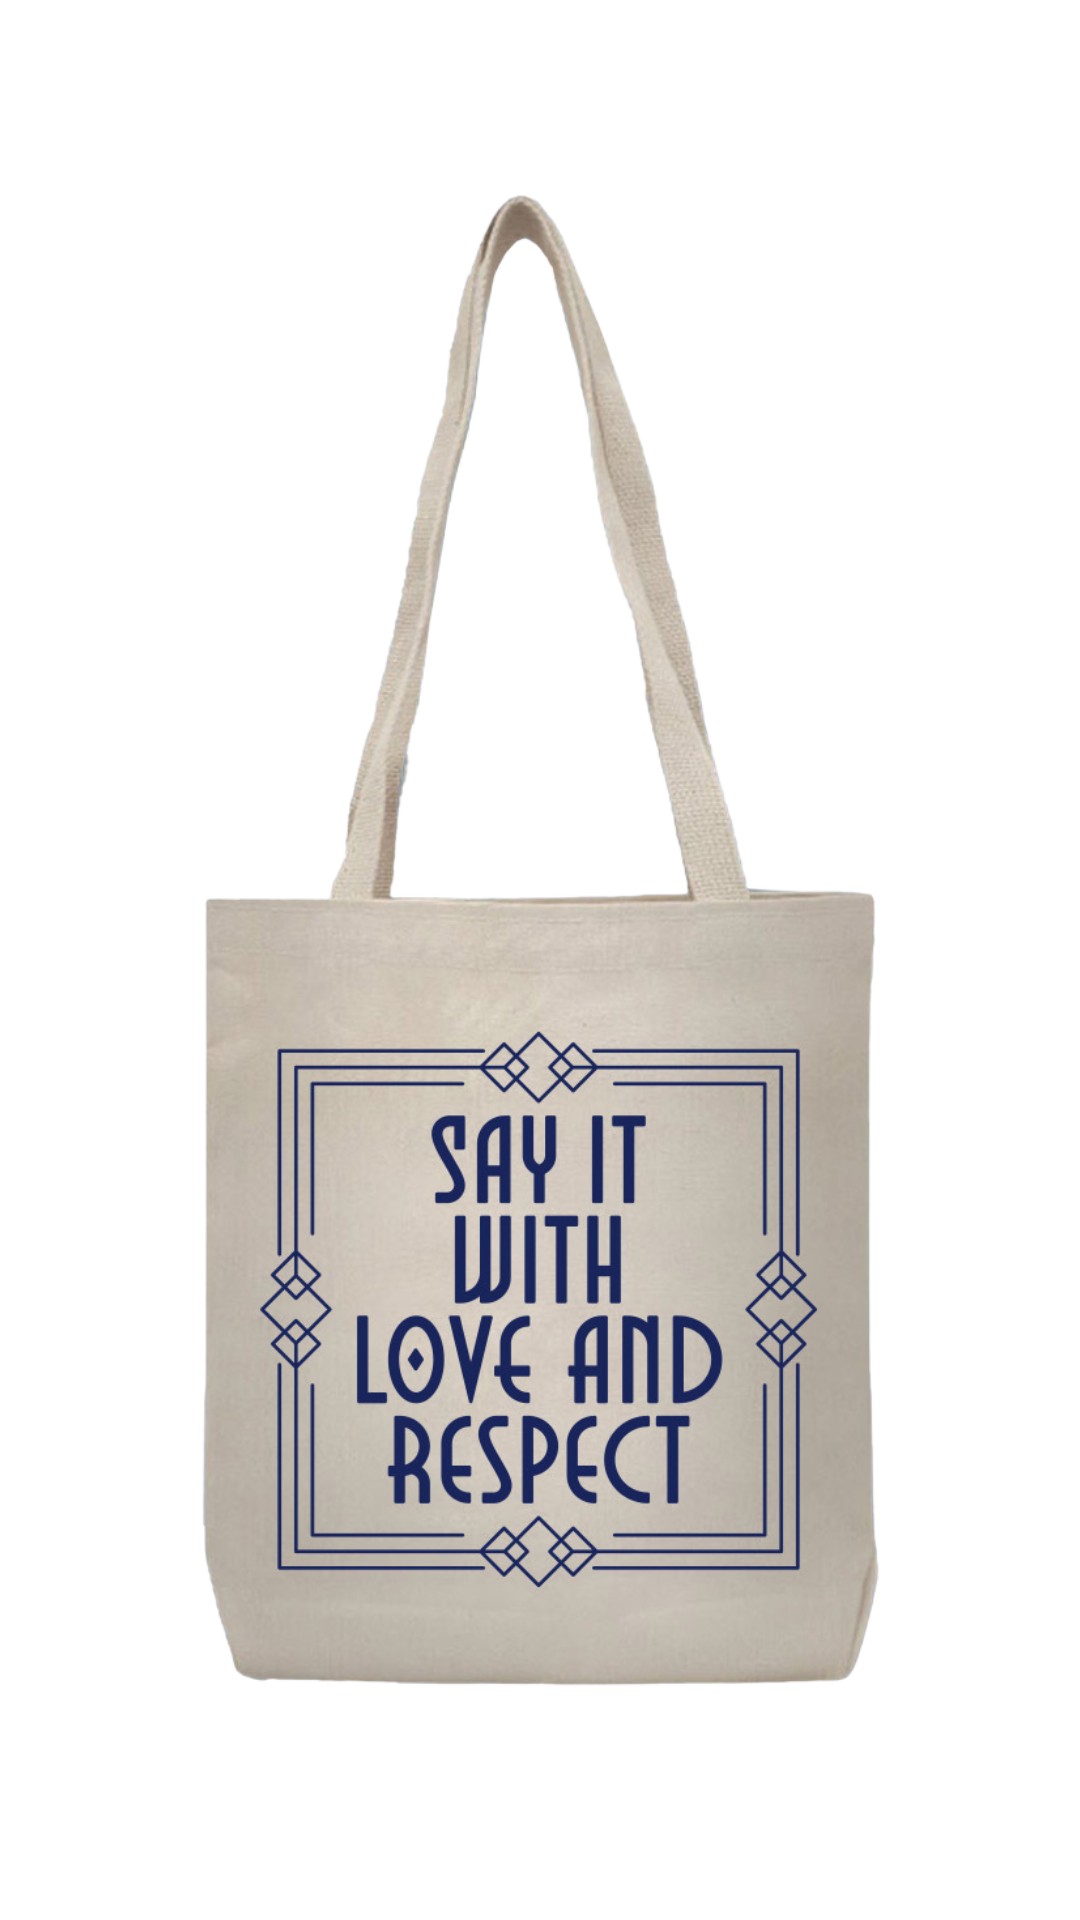 Some Like It Hot Tote